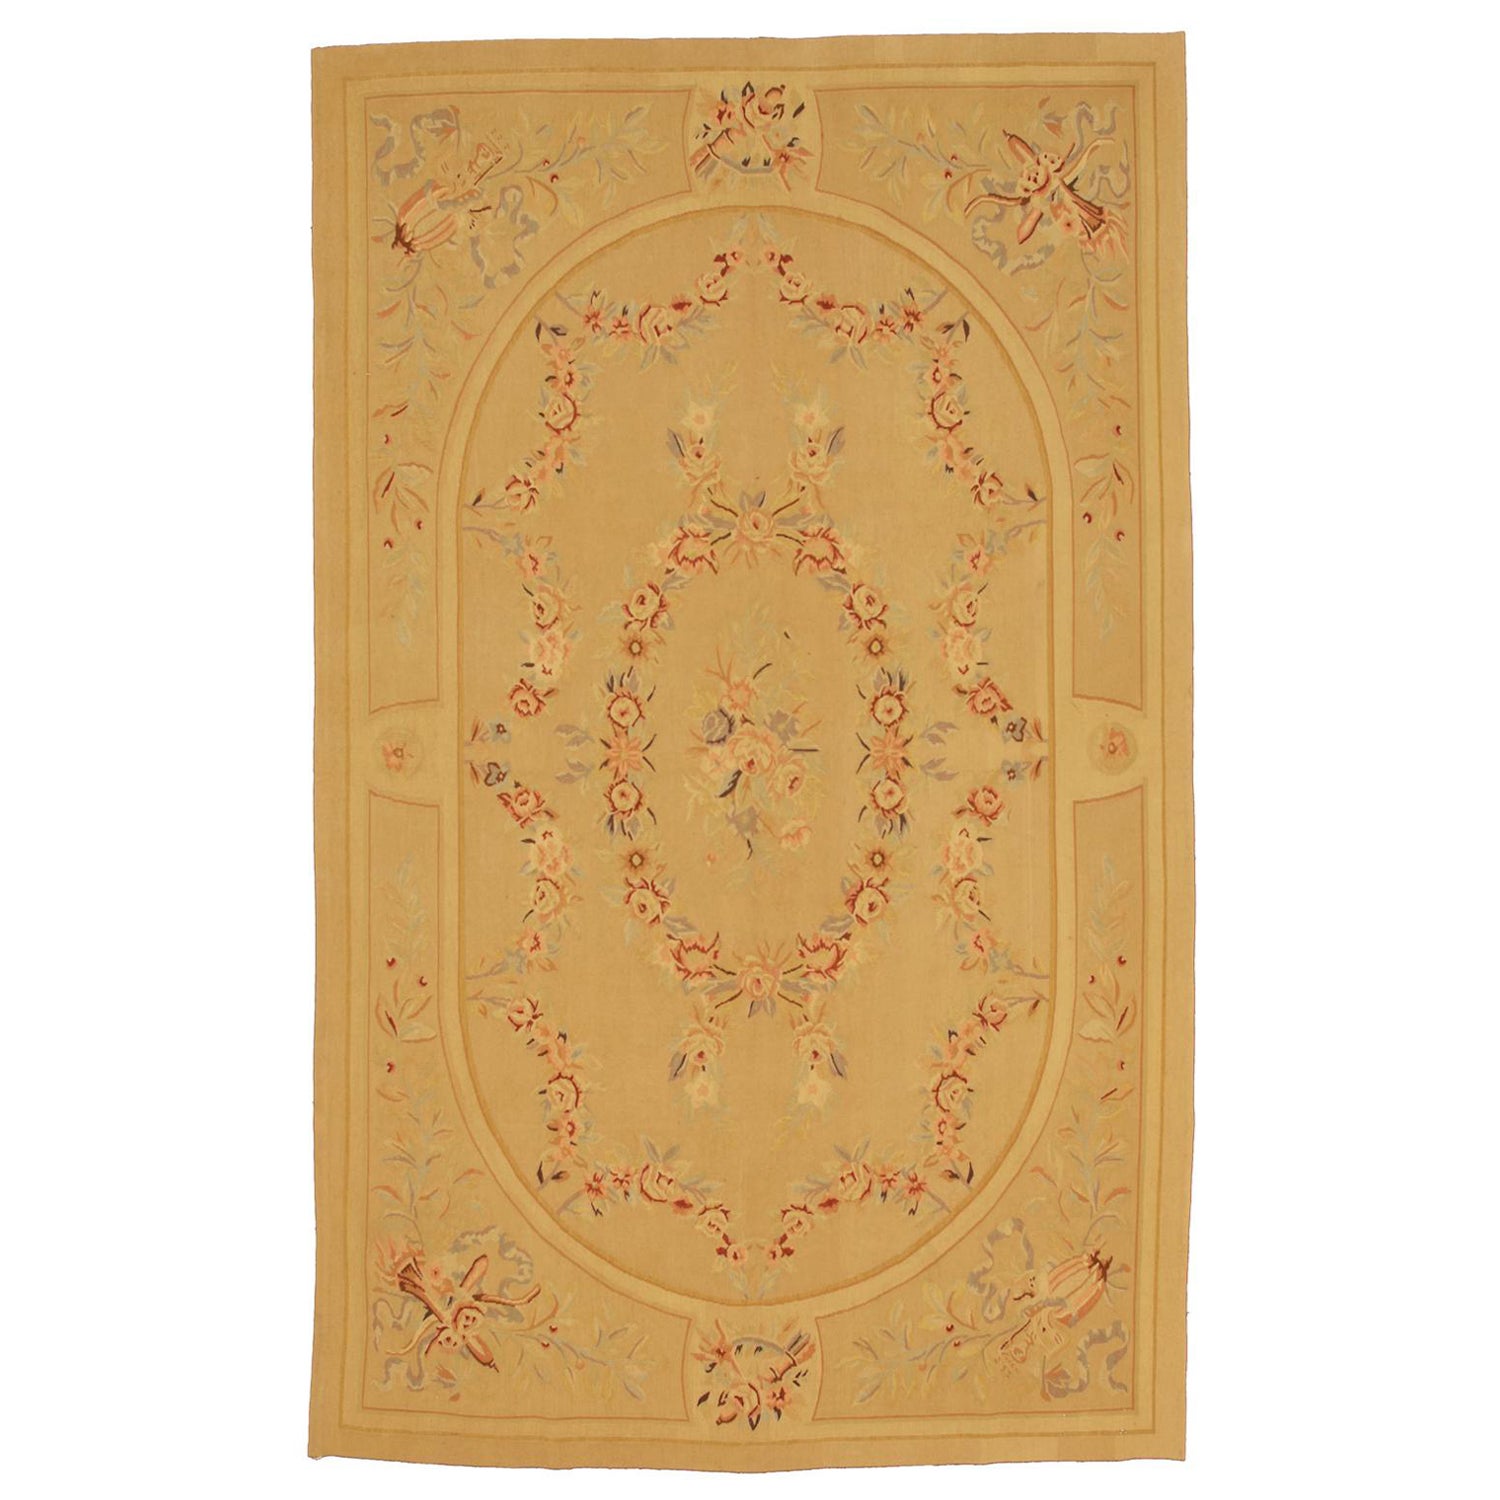 Aubusson Central Asian Rugs